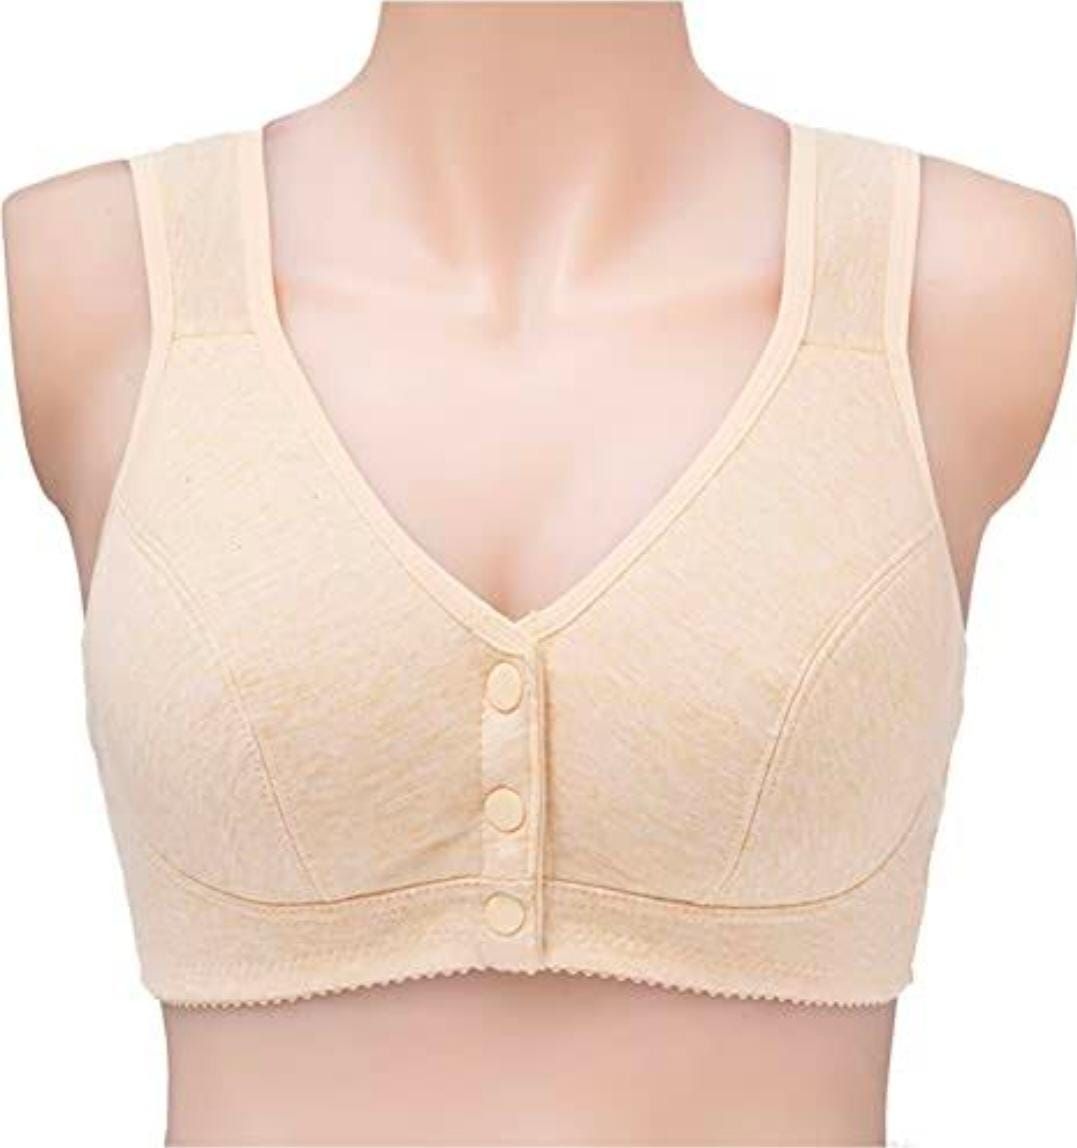 Adjustable comfortable Air Bra - Brazzer for Women and Girls - No